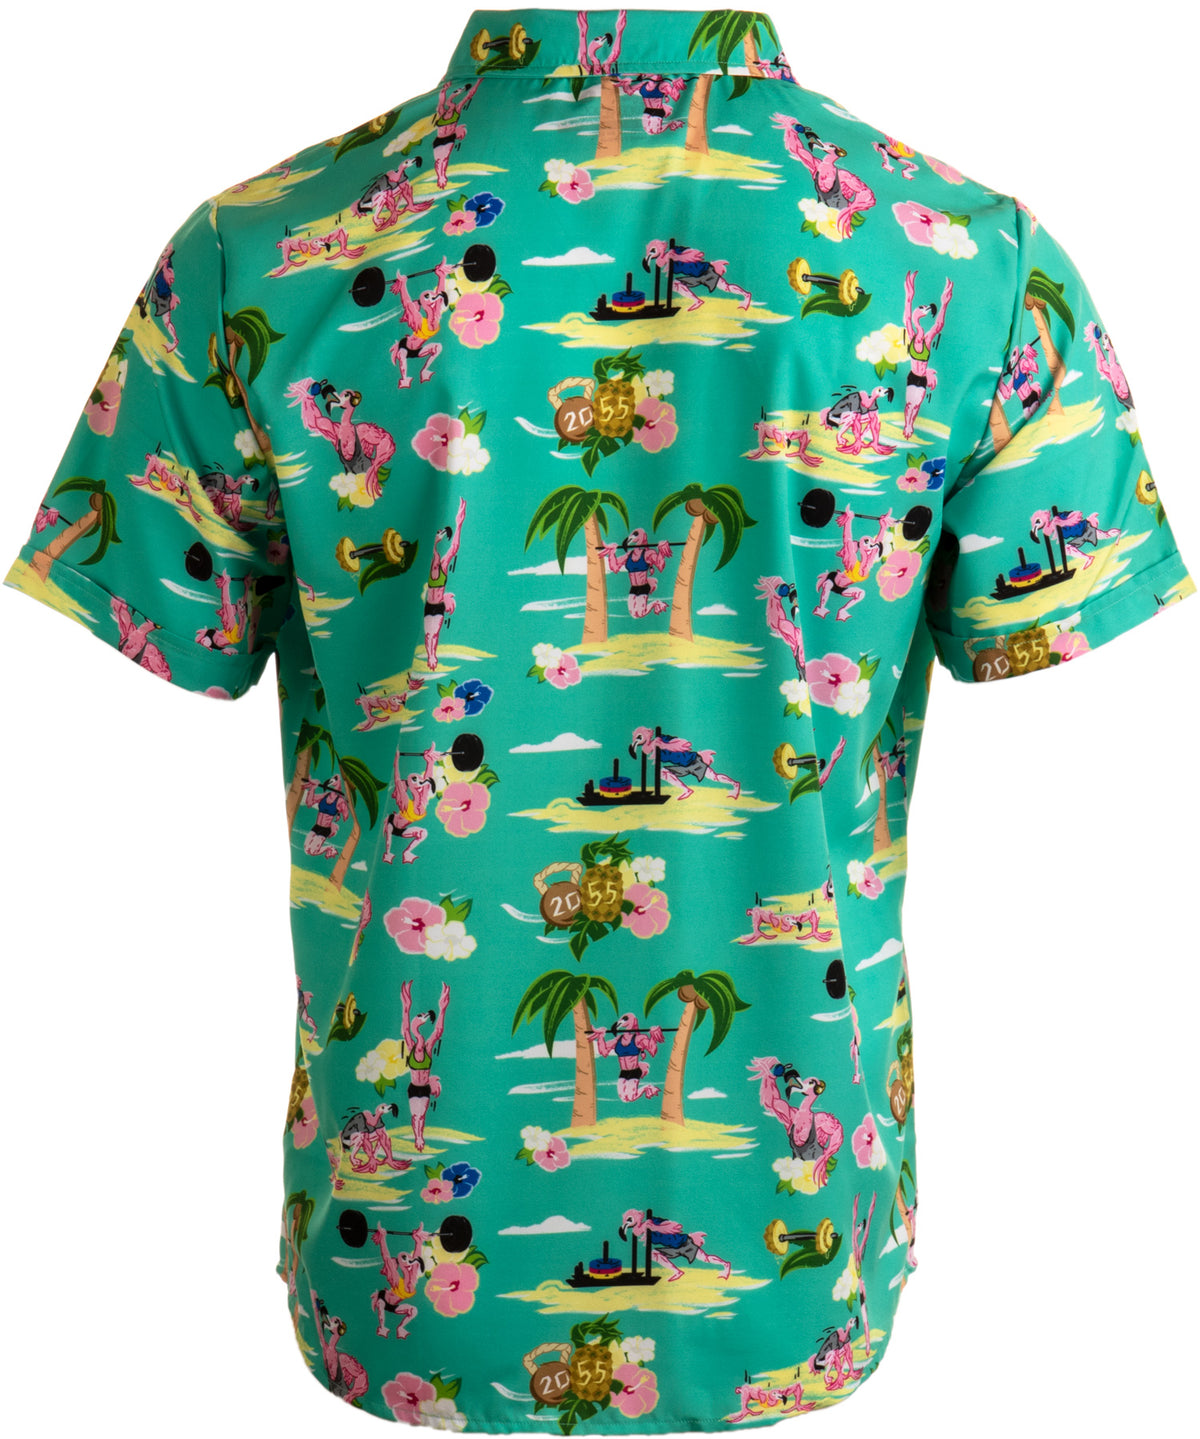 Weightlifting Shirt Weightlifting Tropical Pattern Hawaiian Shirt And Short  Gift Ideas For Weightlifters